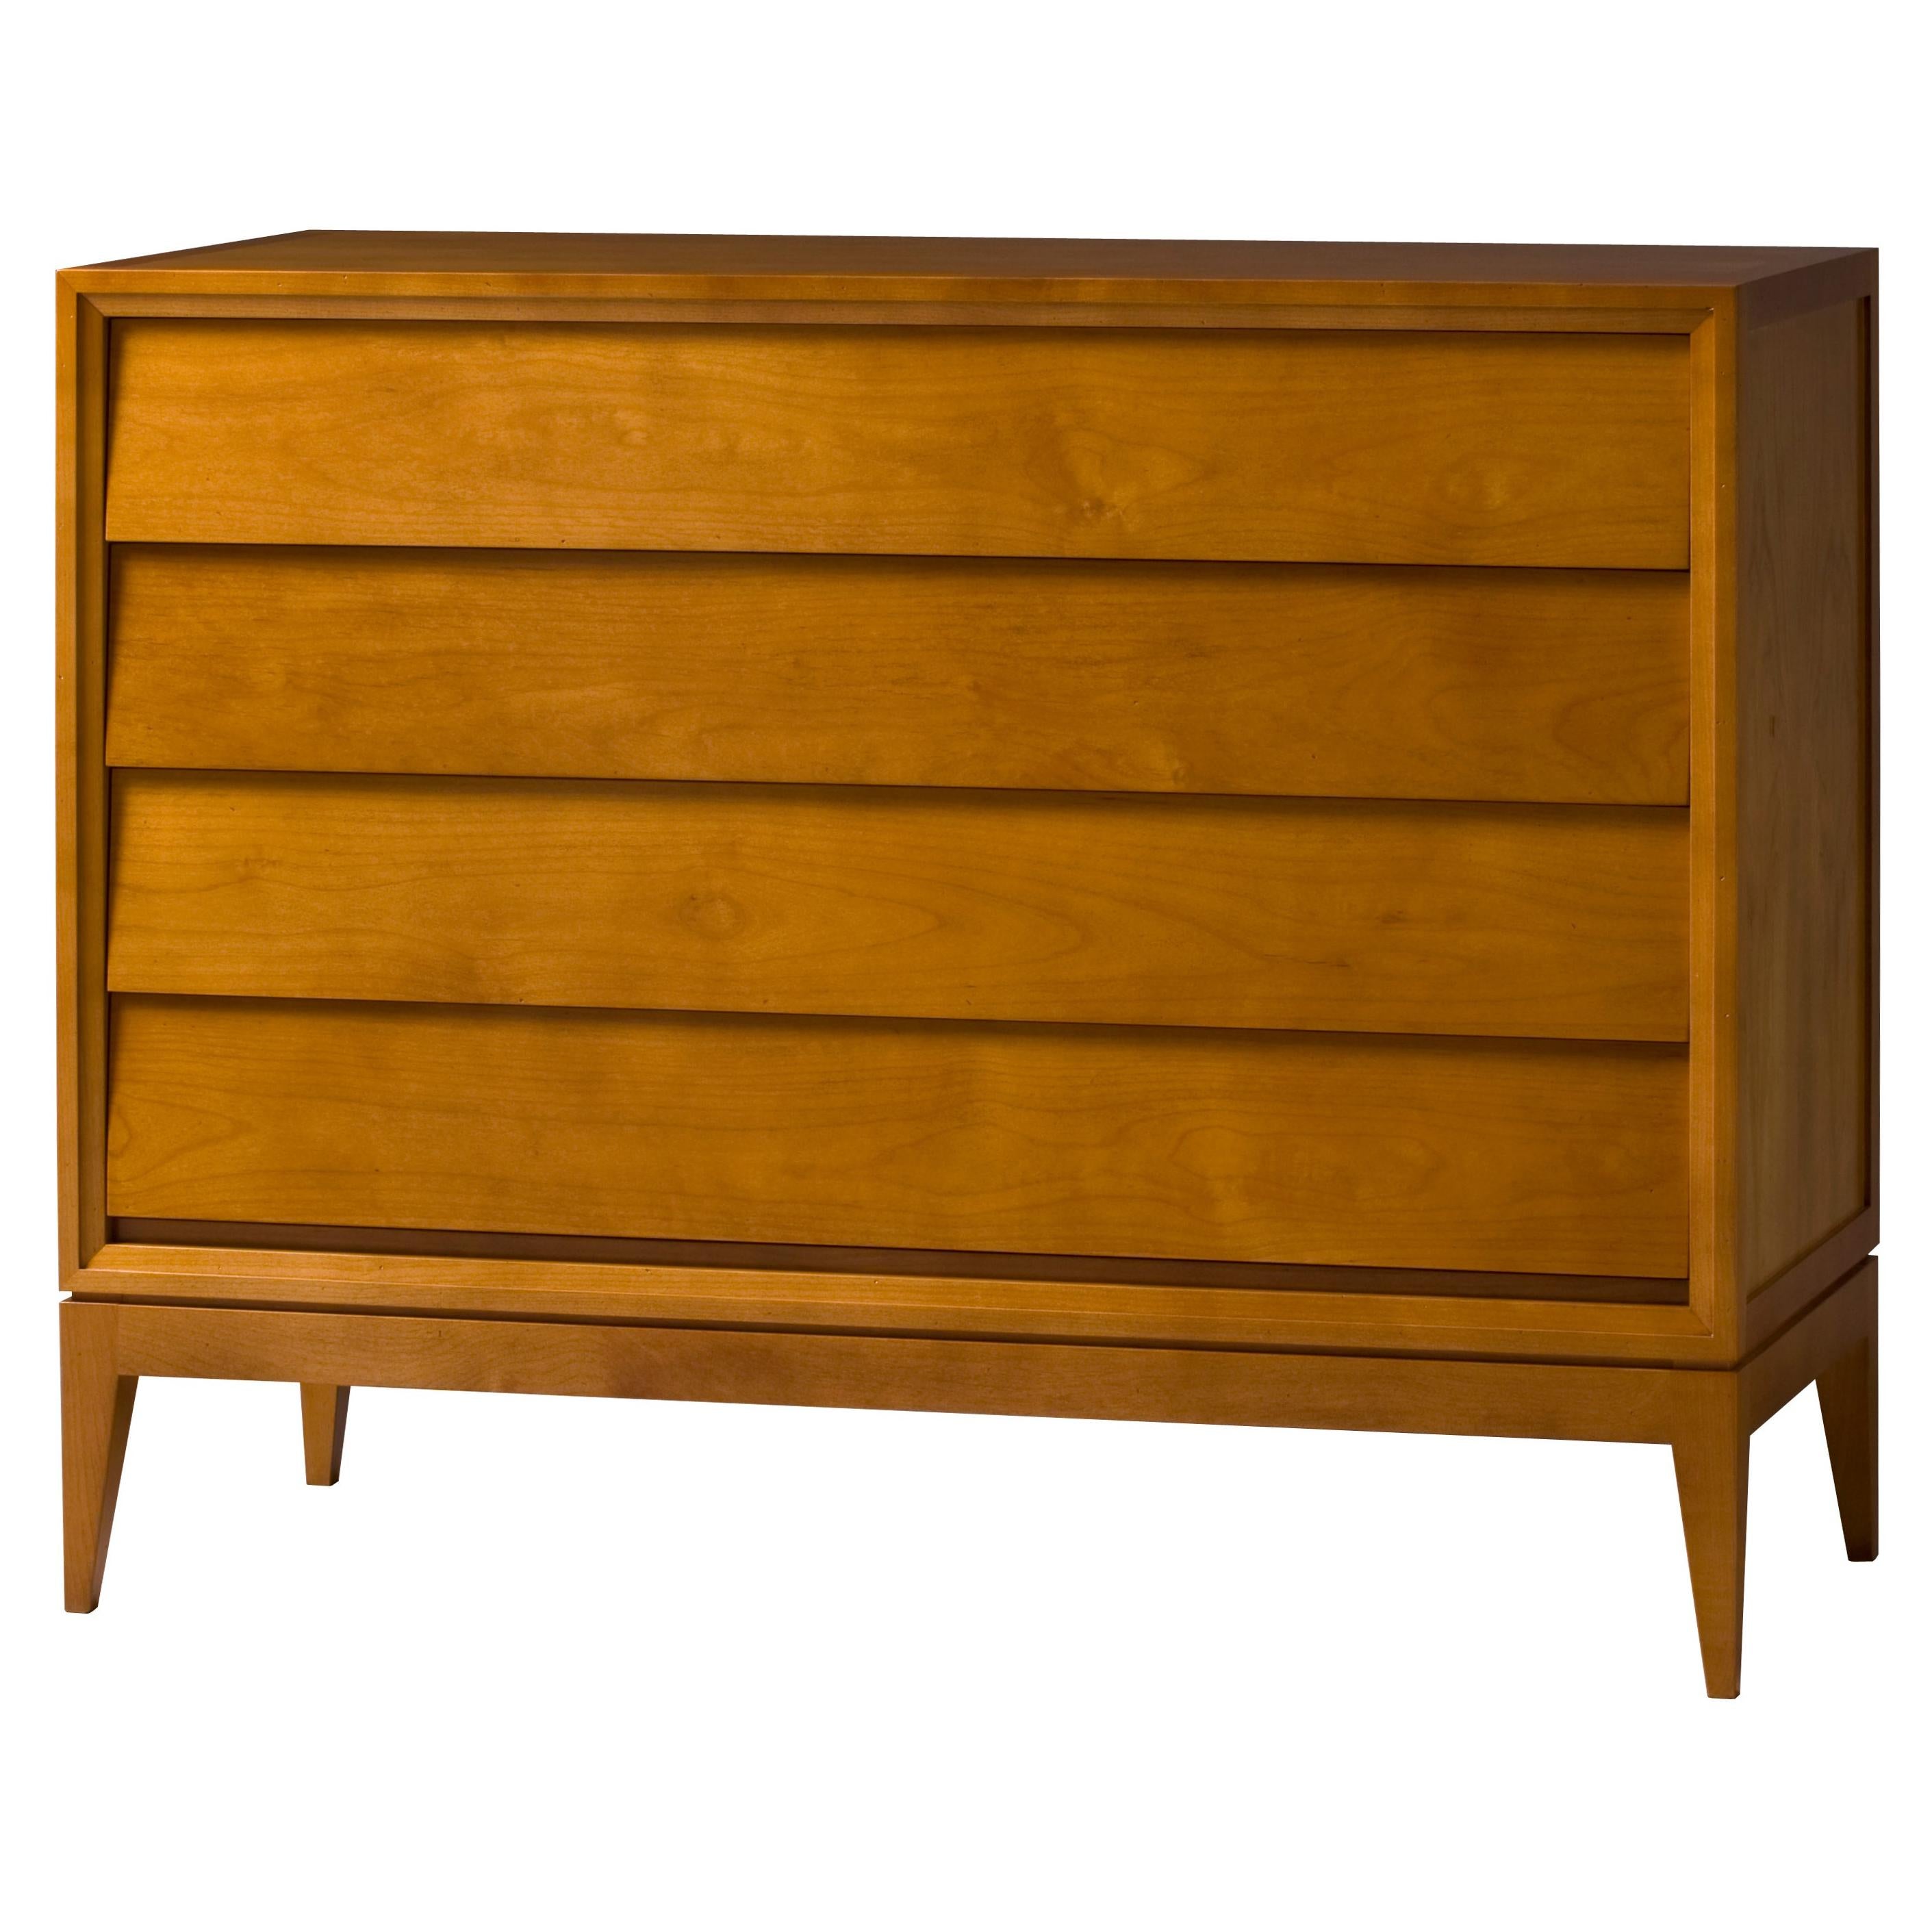 New York, Mid Century Style Wooden Chest of Drawers, by Morelato